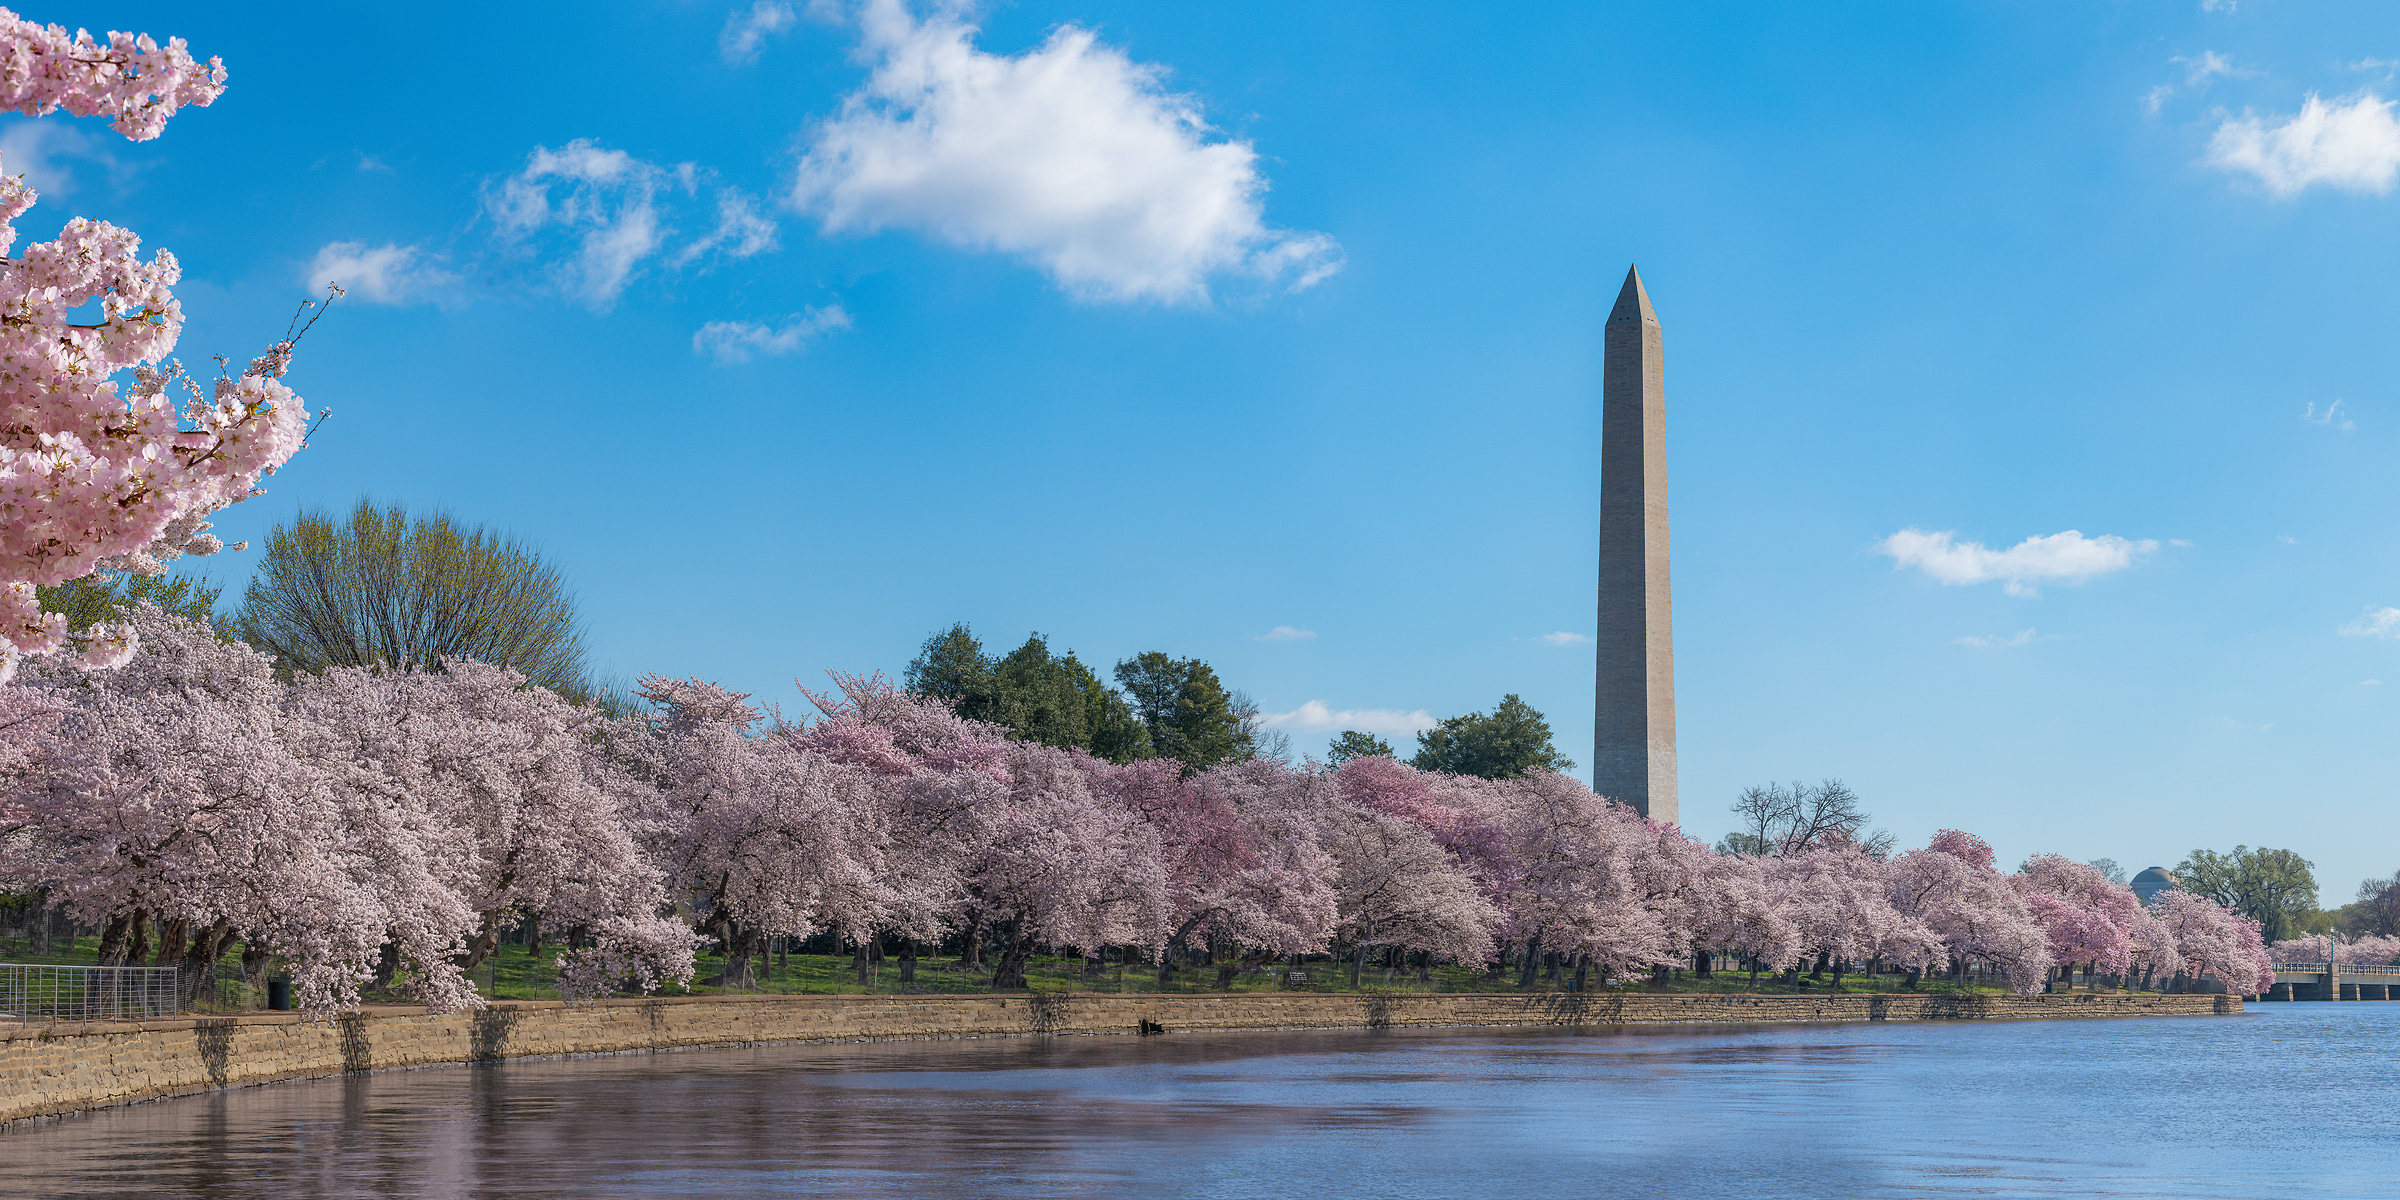 368 megapixels! A very high resolution, large-format VAST photo print of cherry blossoms in front of the Tidal Basin and Washington Monument; photograph created by Tim Lo Monaco in Tidal Basin, National Mall, Washington, D.C.